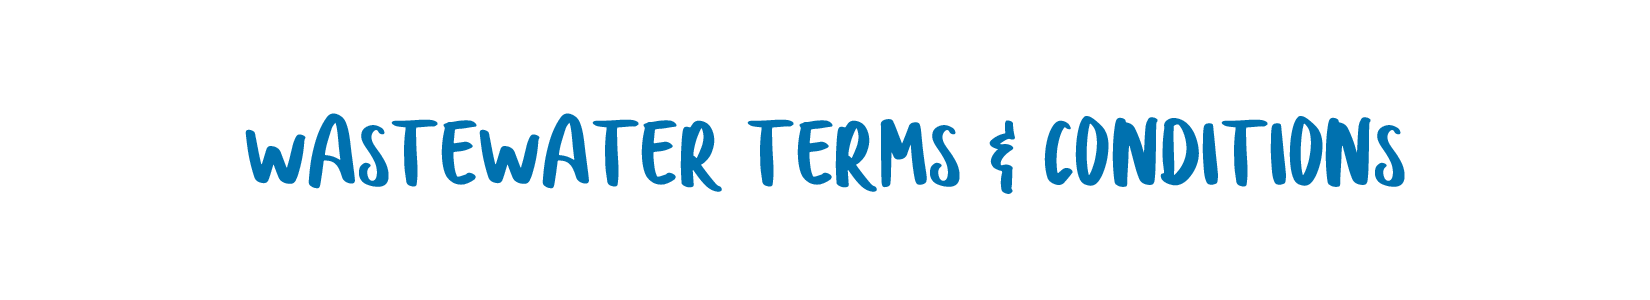 Wastewater terms and conditions banner